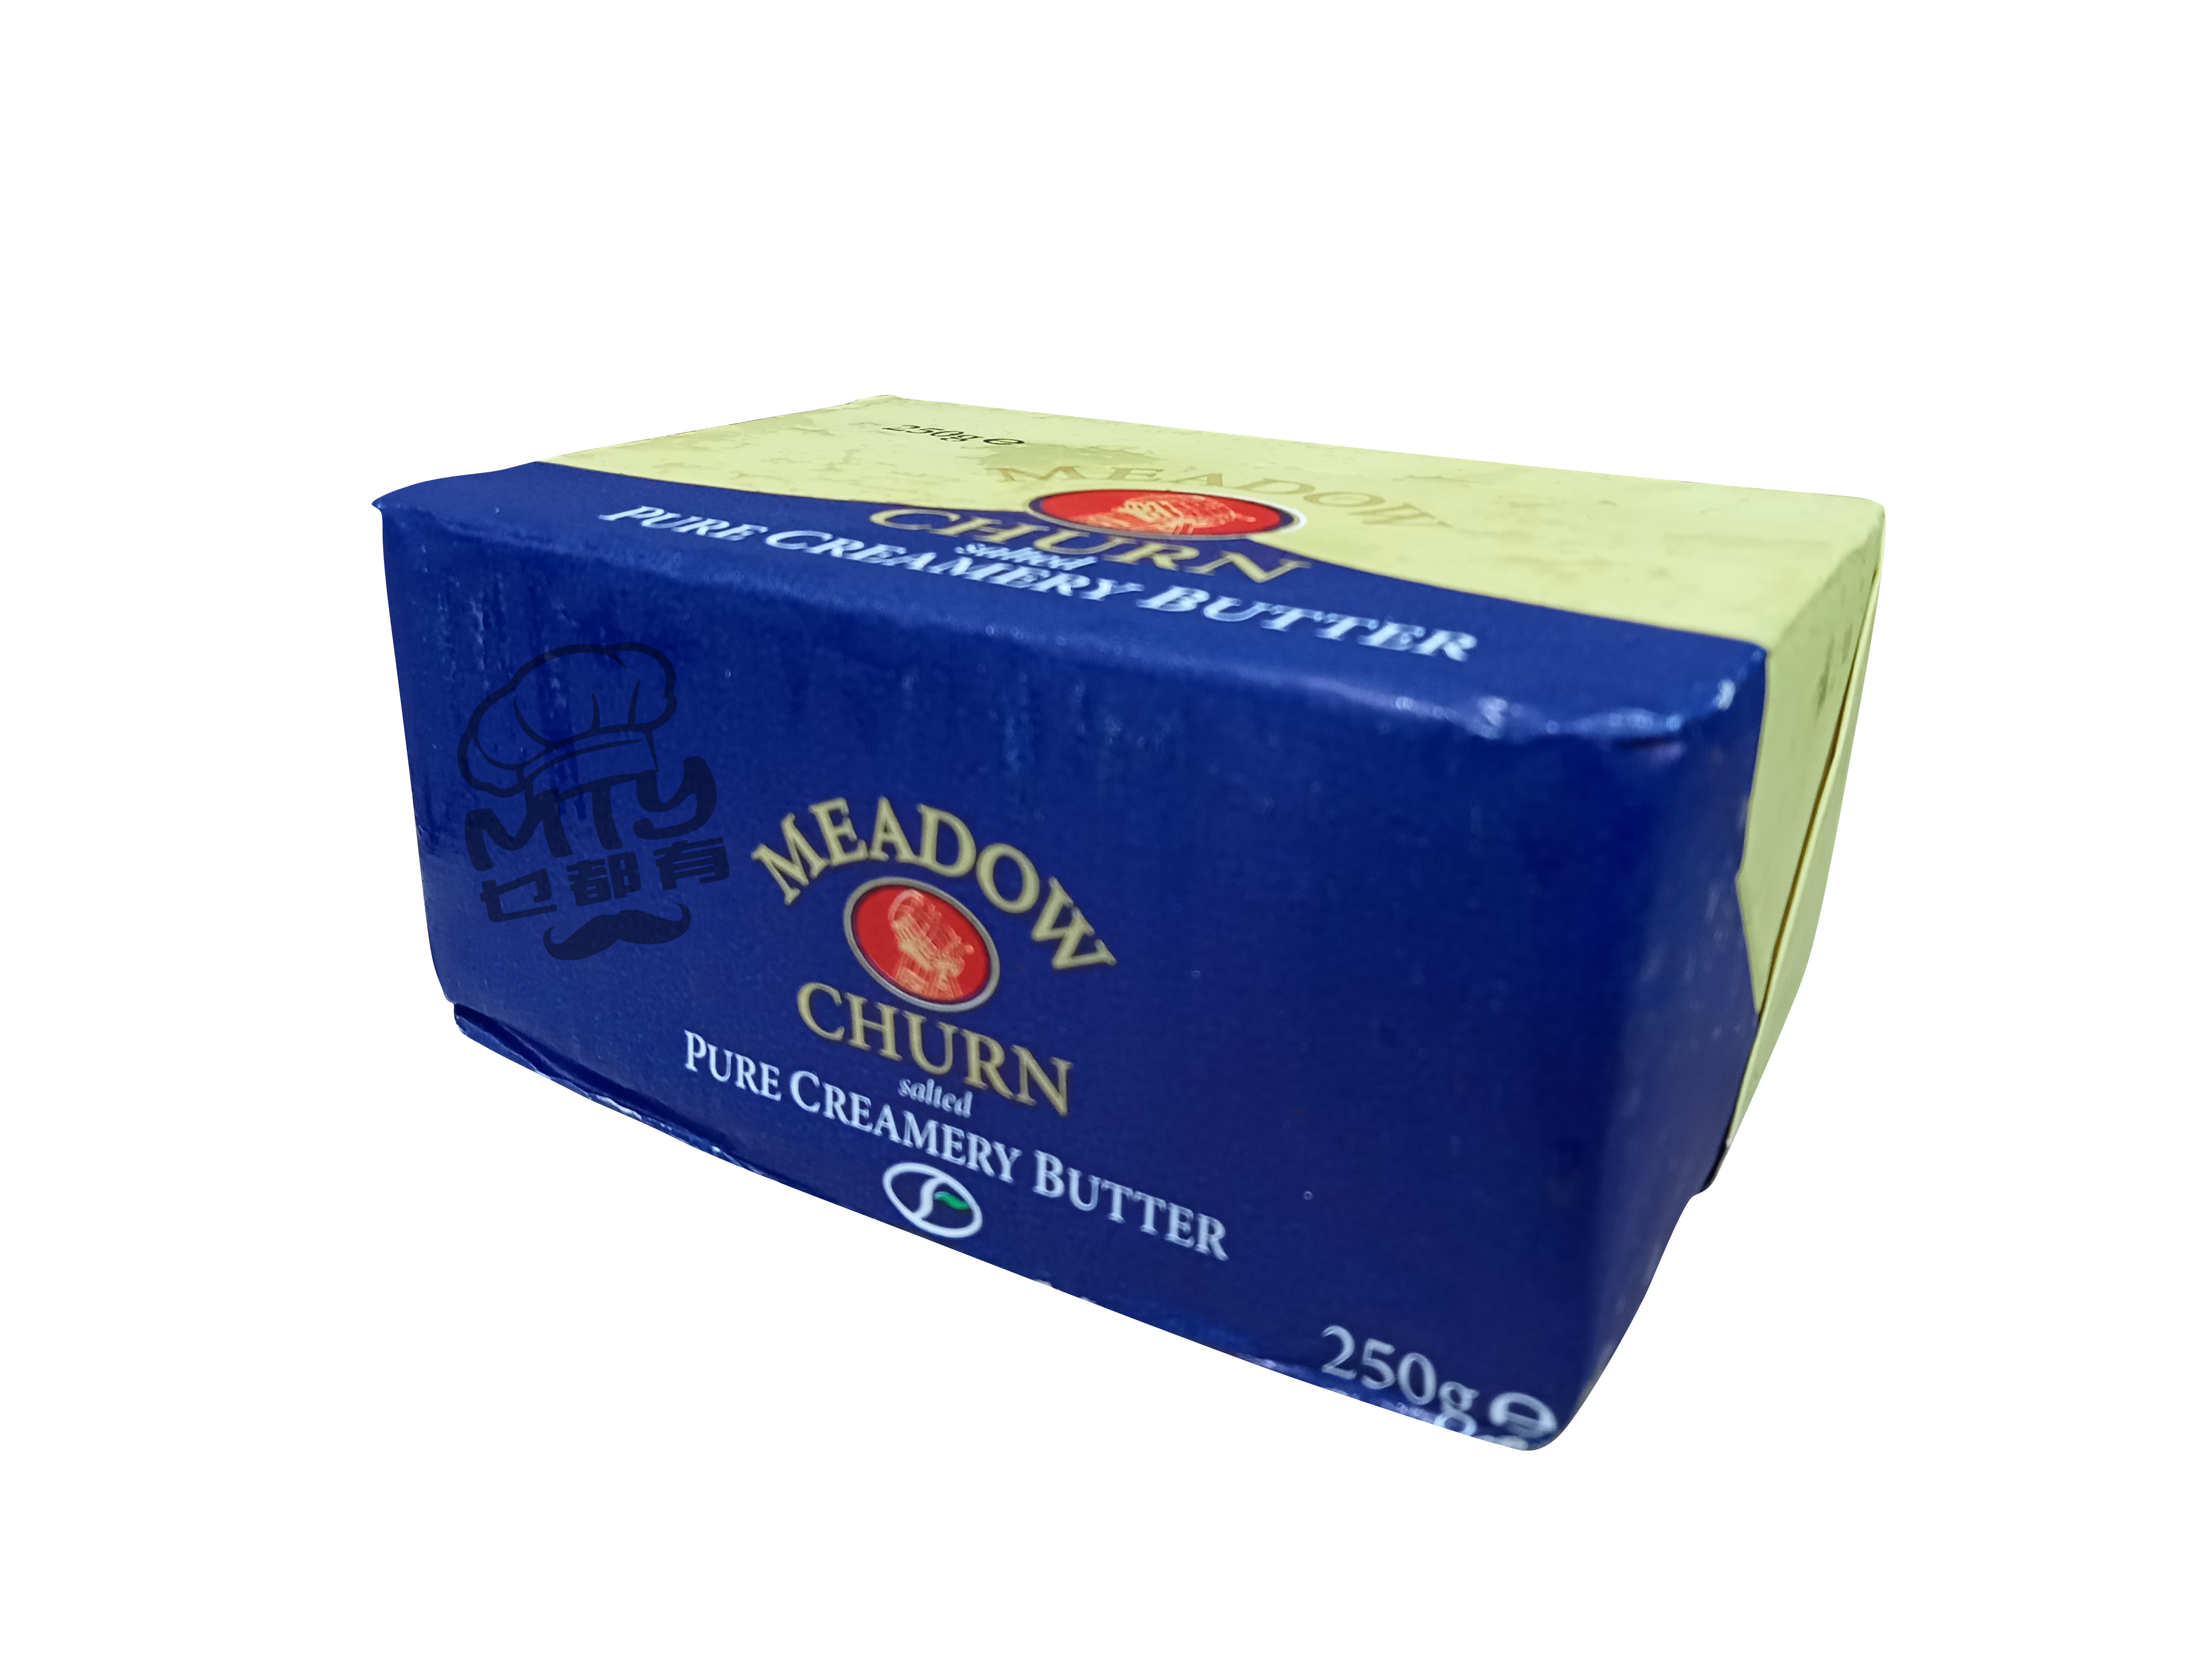 MEADOW (Salted) Butter 250g